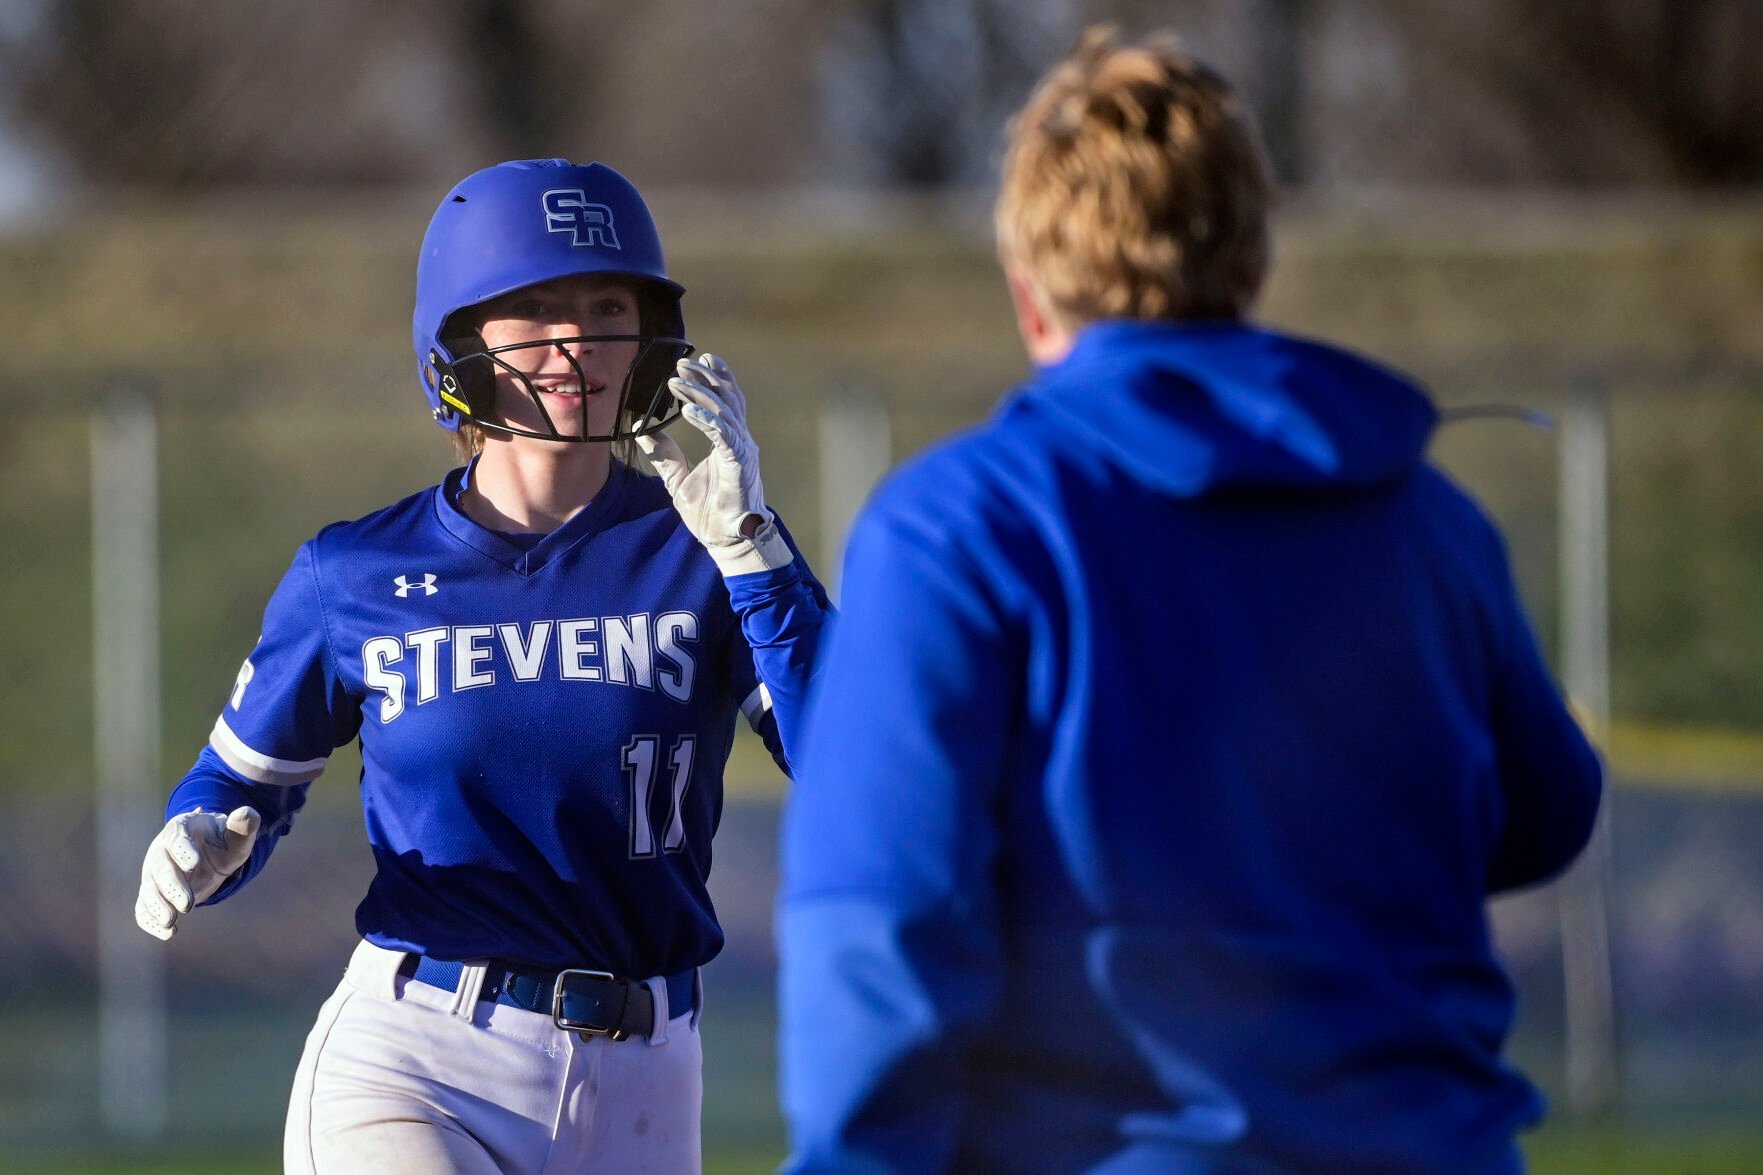 Rapid City Stevens Rout Spearfish with Hunt’s Grand Slam and Van Zee’s Pitching Dominance